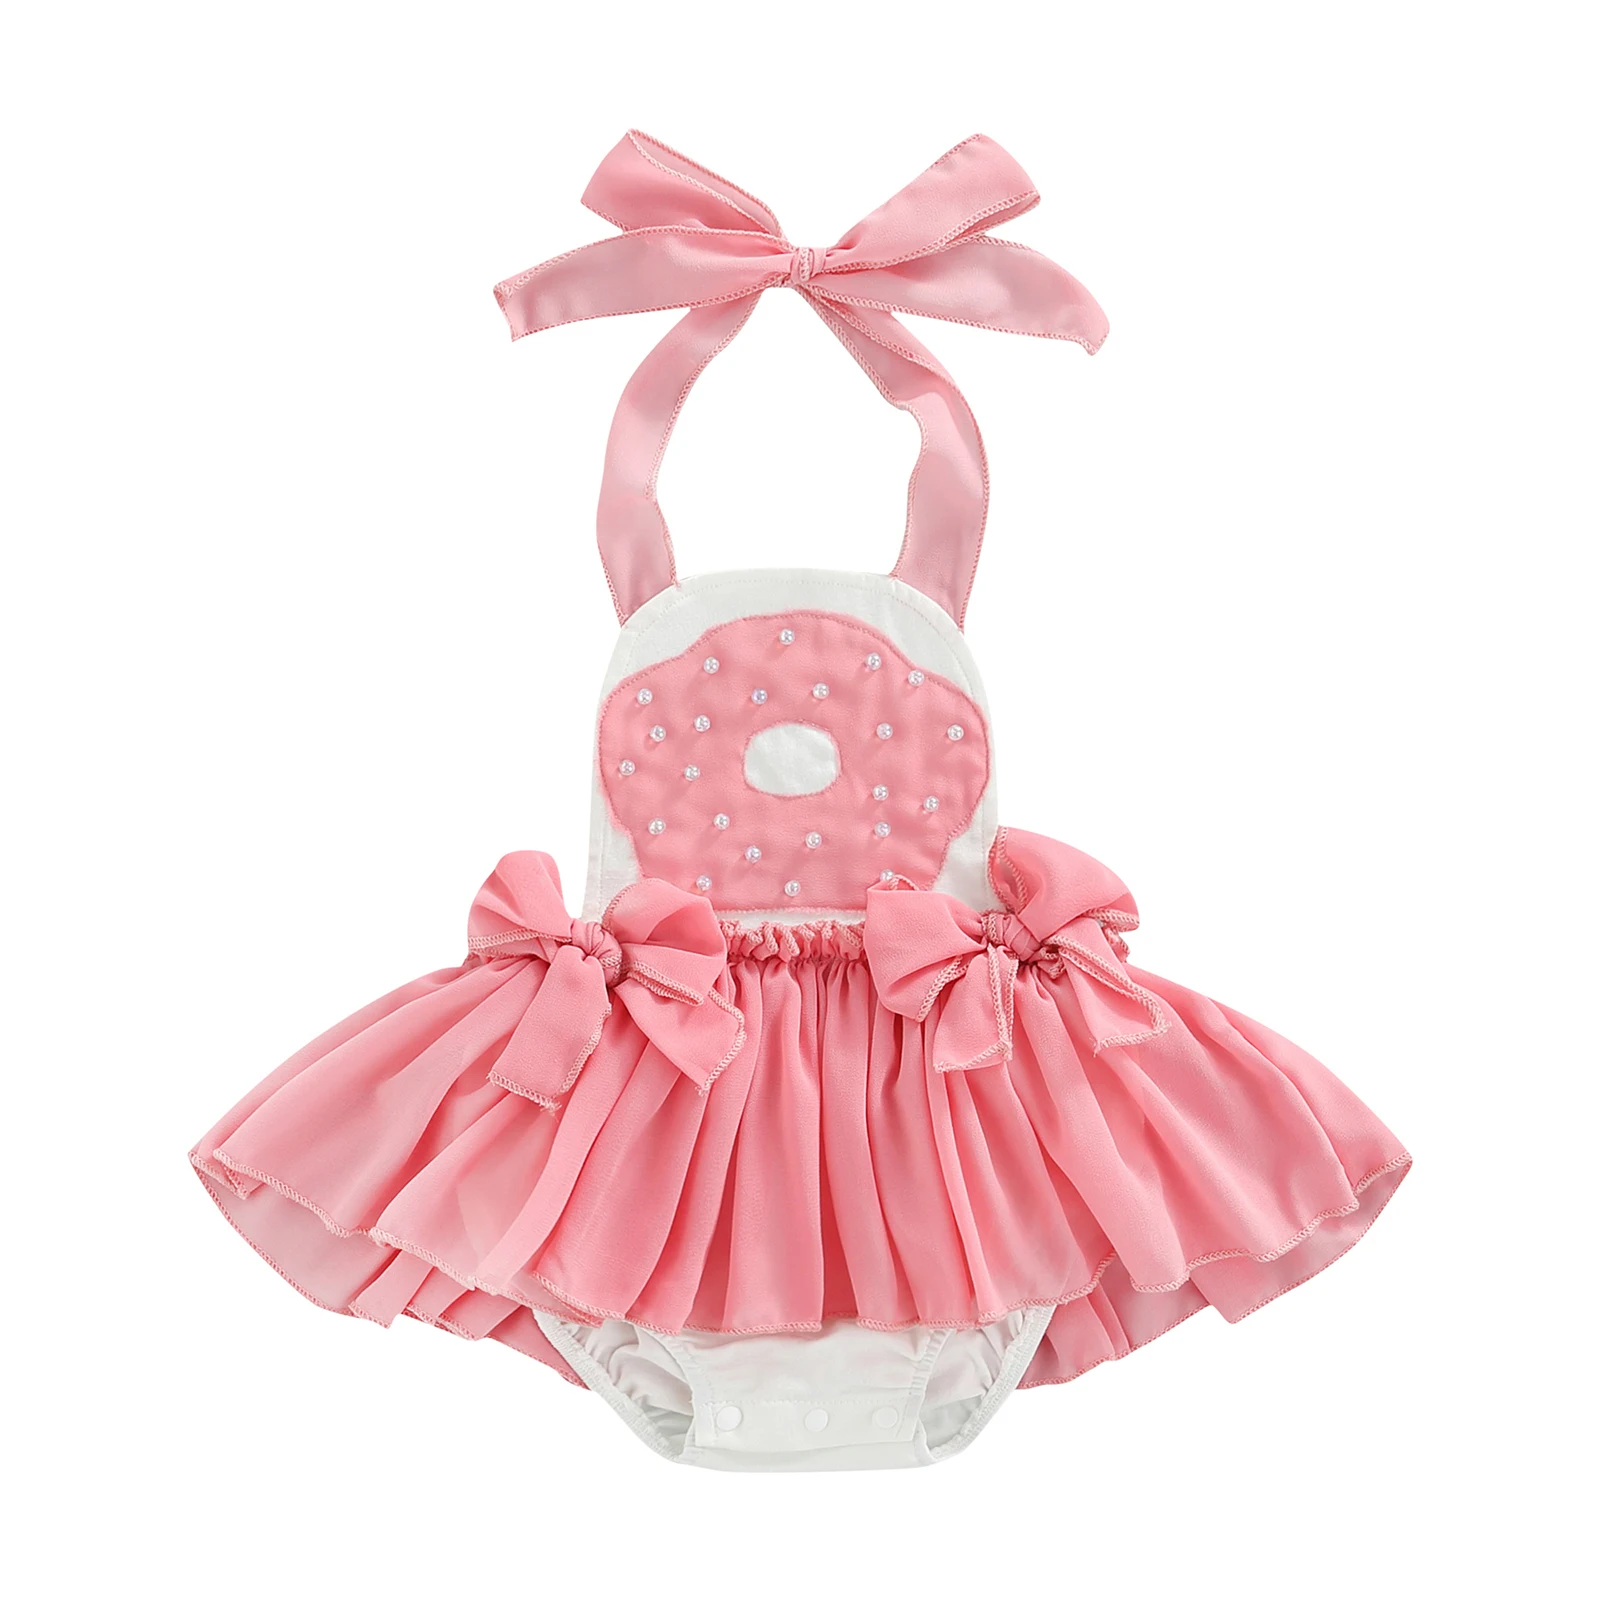 Infant Newborn Baby Girl Romper Donut Print Pearl Bow Jumpsuit Princess Birthday Clothes Sunsuit Playsuit D01 Baby Bodysuits for boy